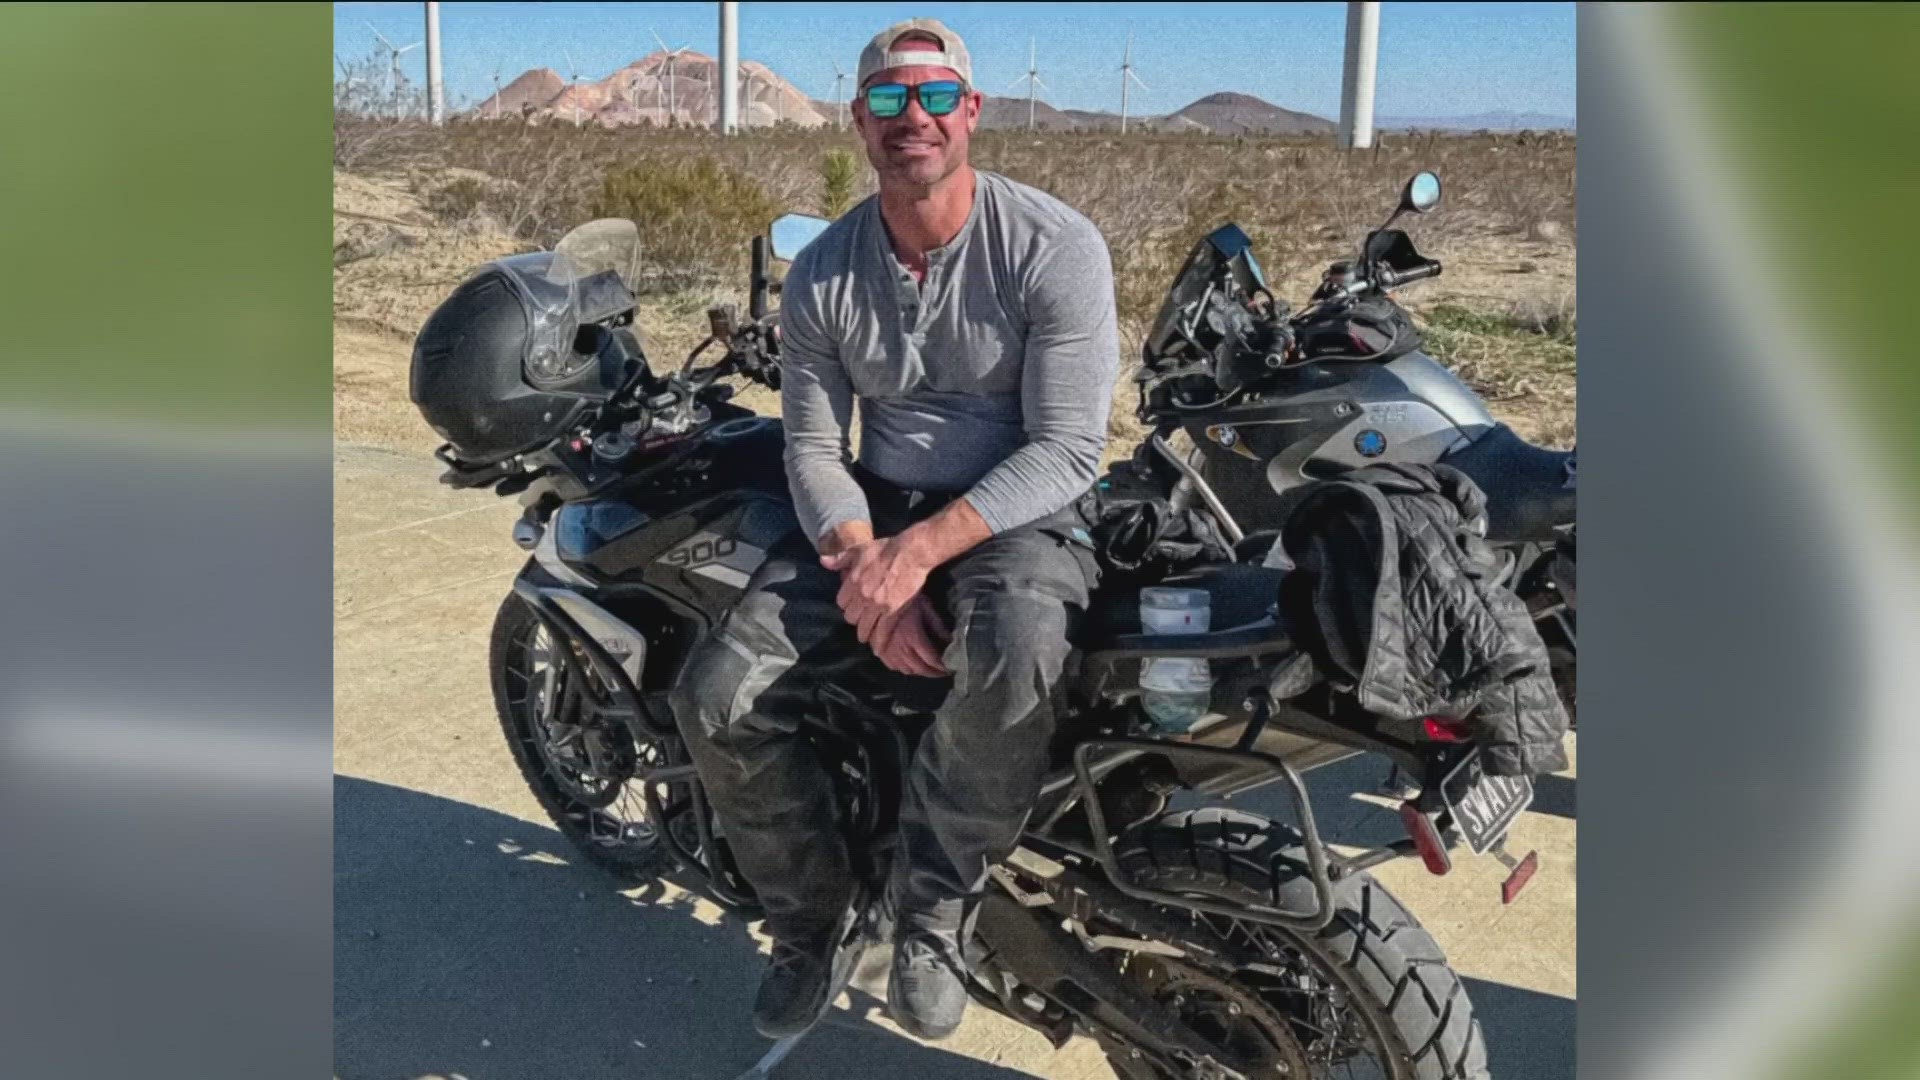 Trent Hancock with The Saguaros charities shares how Chris Sloat's worldwide bike tour aims to raise money for the organization and Homeless Youth Connection.